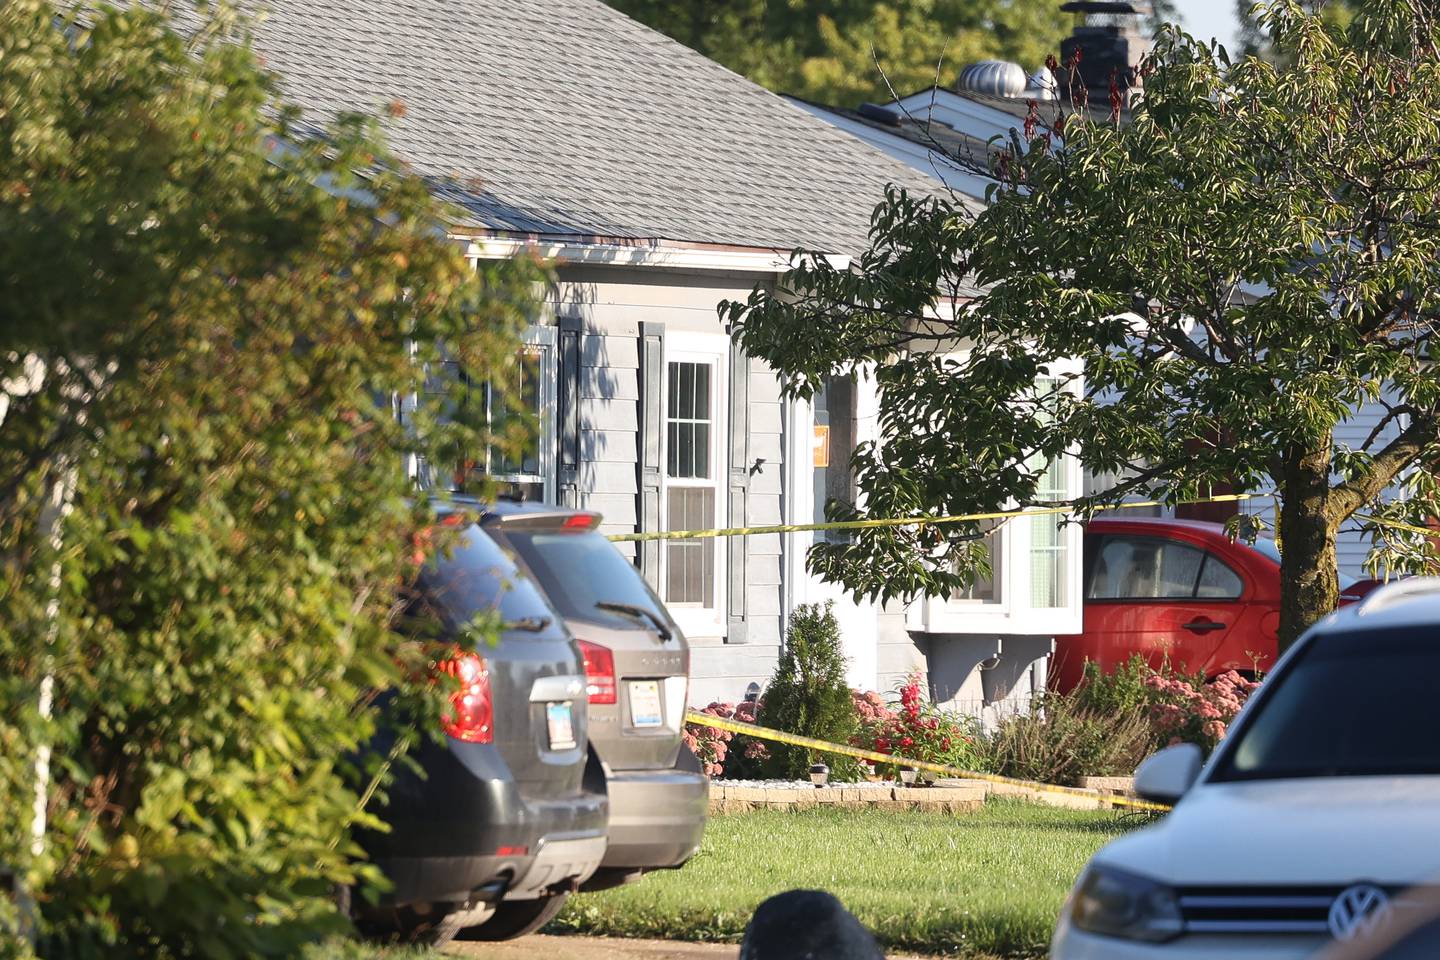 Police tape blocks off a home on the 500 block of Concord Avenue where police found the bodies of two adults and two children with gunshot wounds on Monday, Sept. 18, in Romeoville.